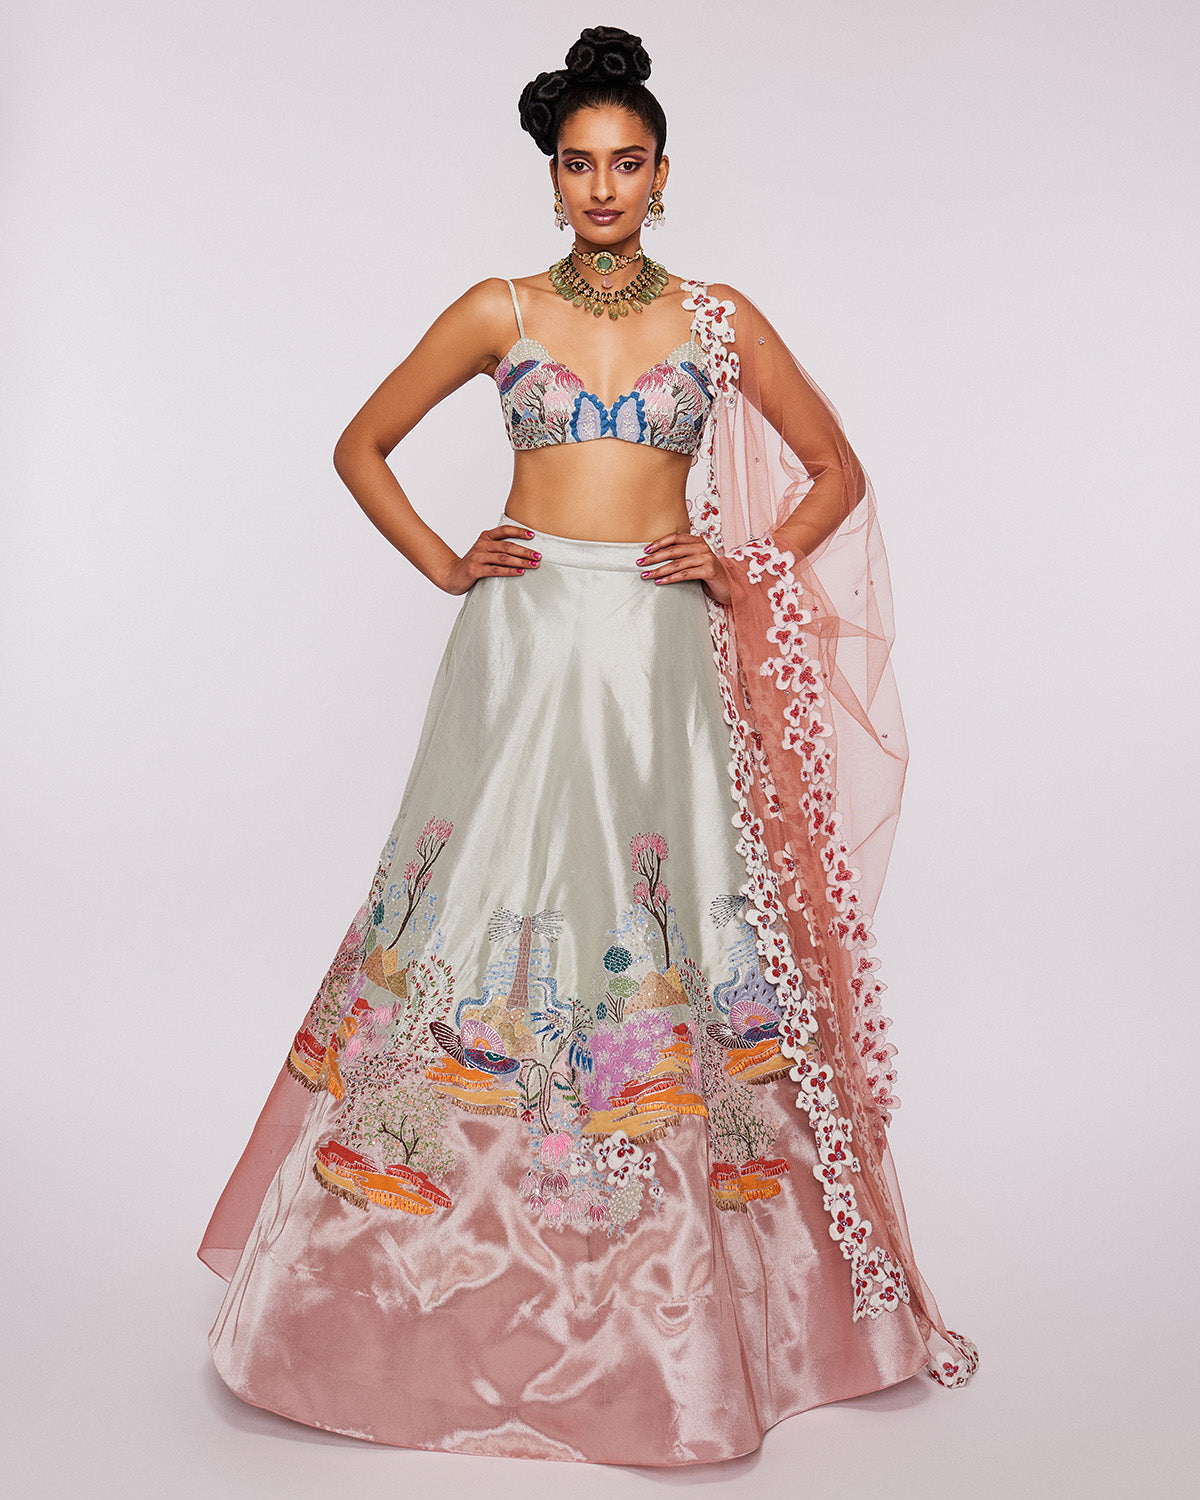 Ivory and Peach Divergence Floral Embellished Lehenga Set by Aisha Rao at KYNAH